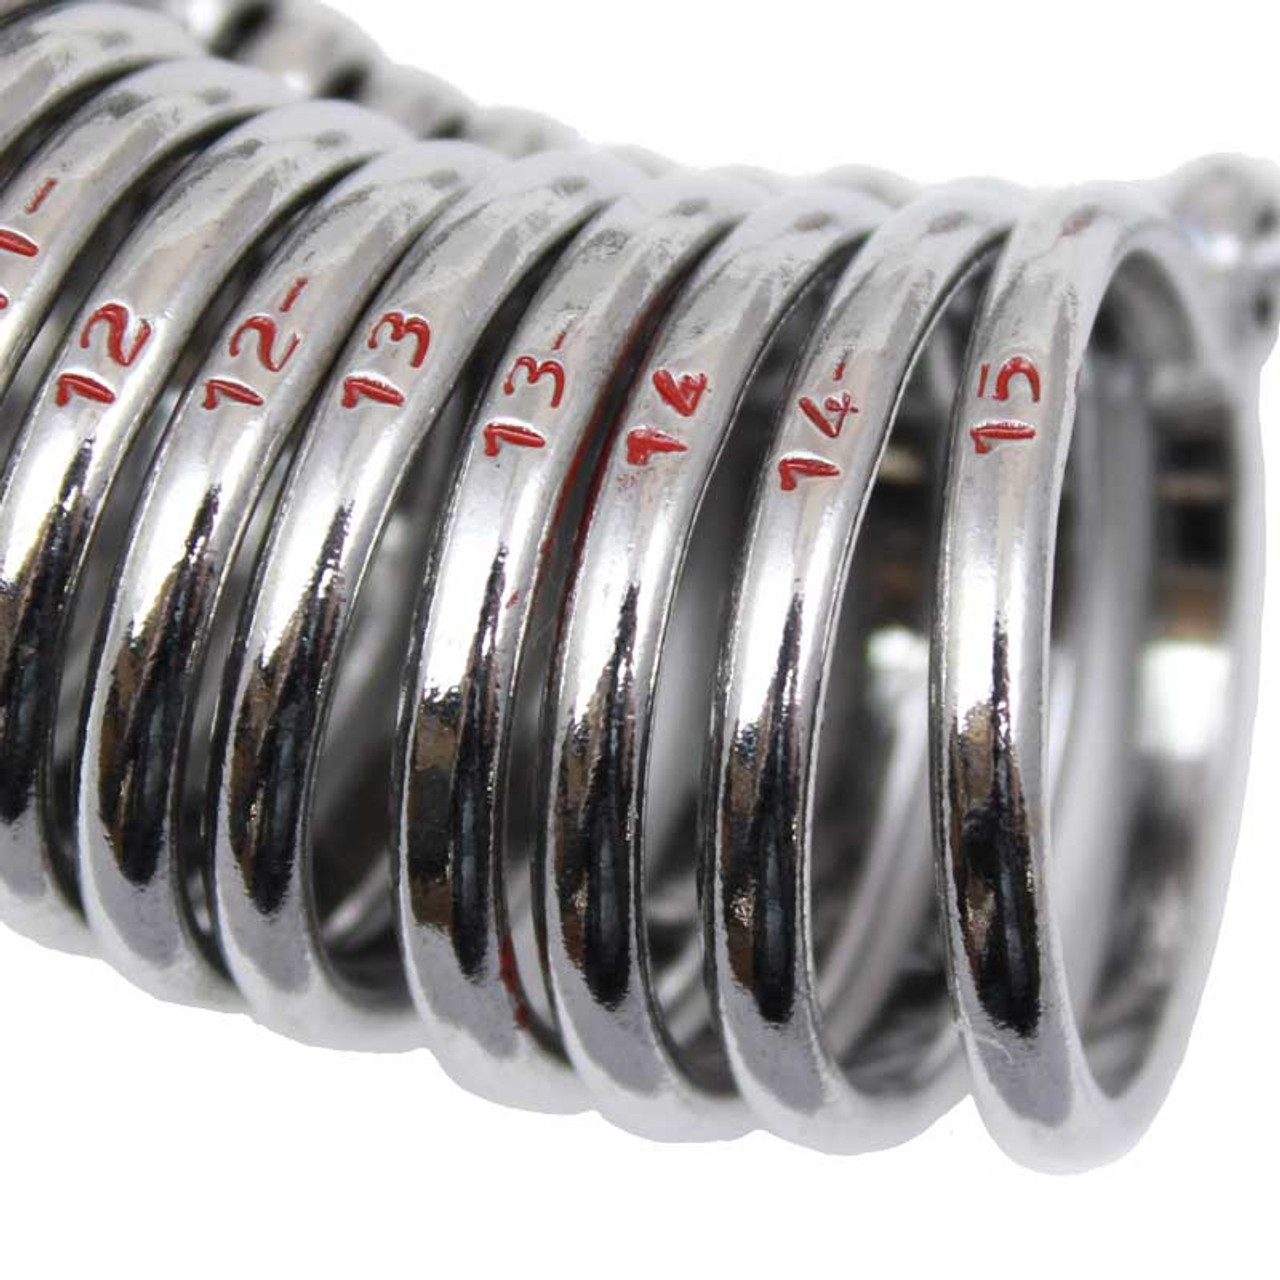 Finger Ring Sizer Gauge Half Round Style Measures Sizes 1-15 - Findings  Outlet